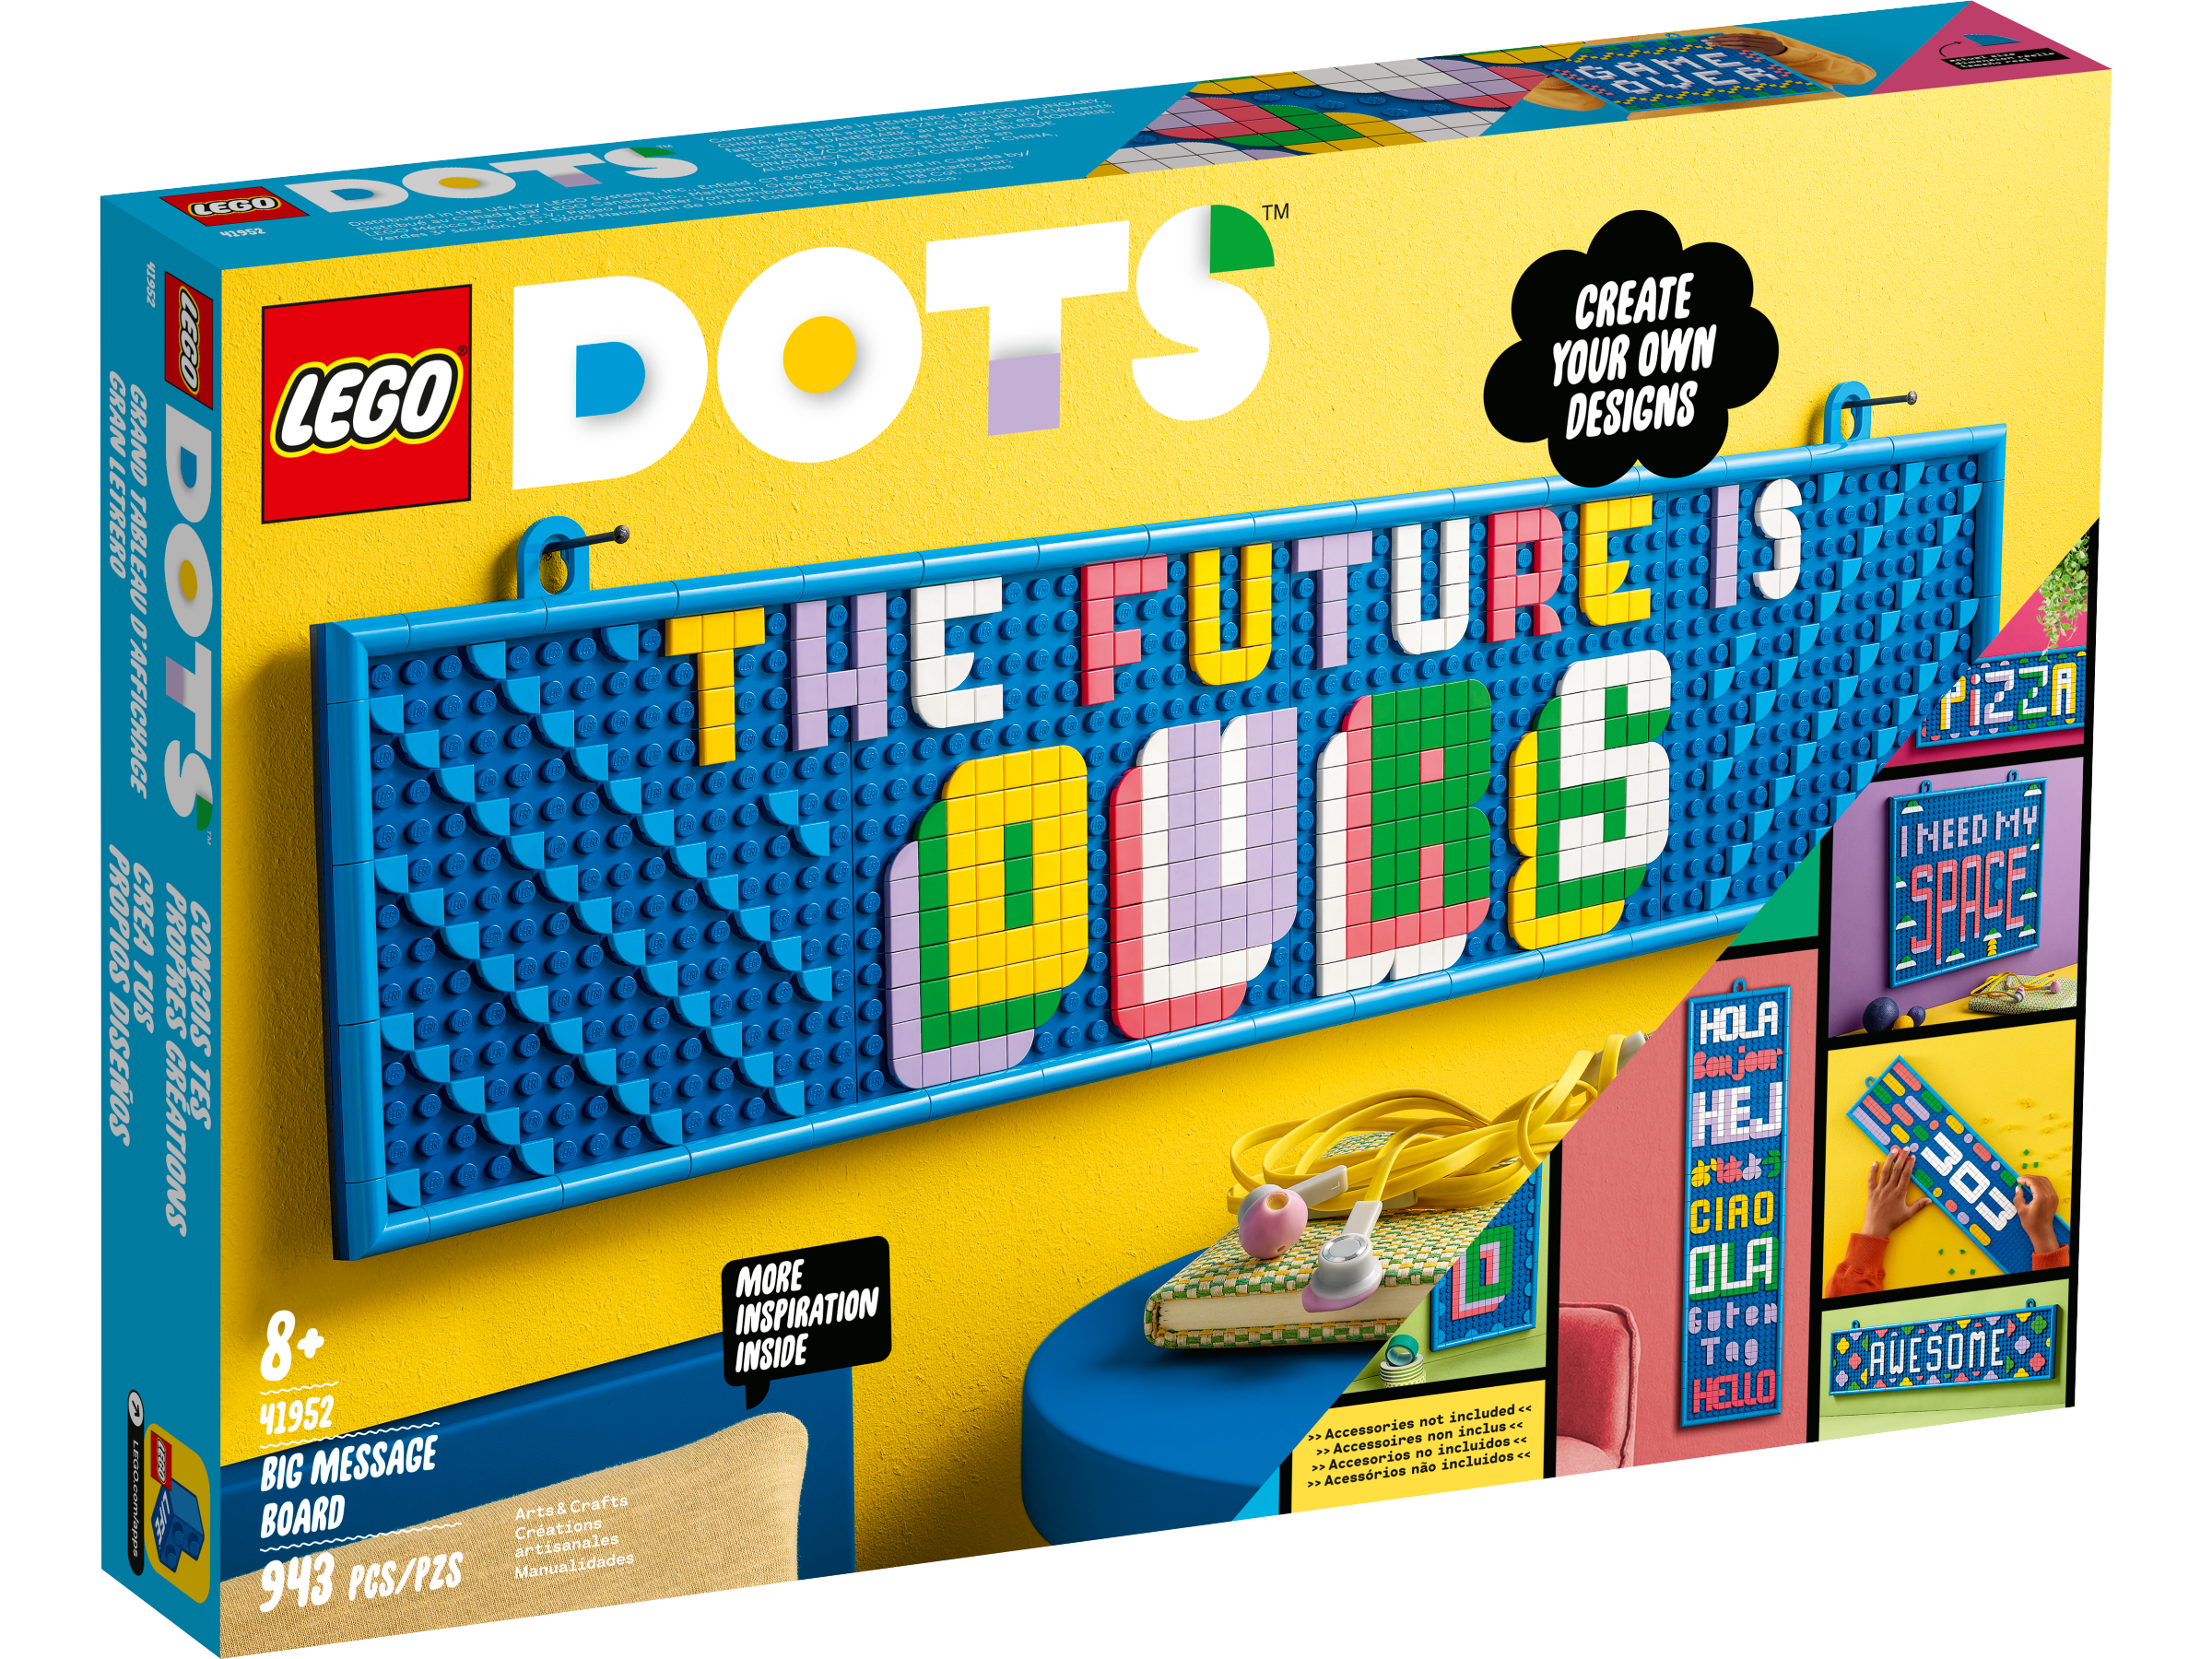 LEGO DOTS 41951 Message board and 41952 Big Message Board - Signs, signs,  everywhere signs [Review] - The Brothers Brick